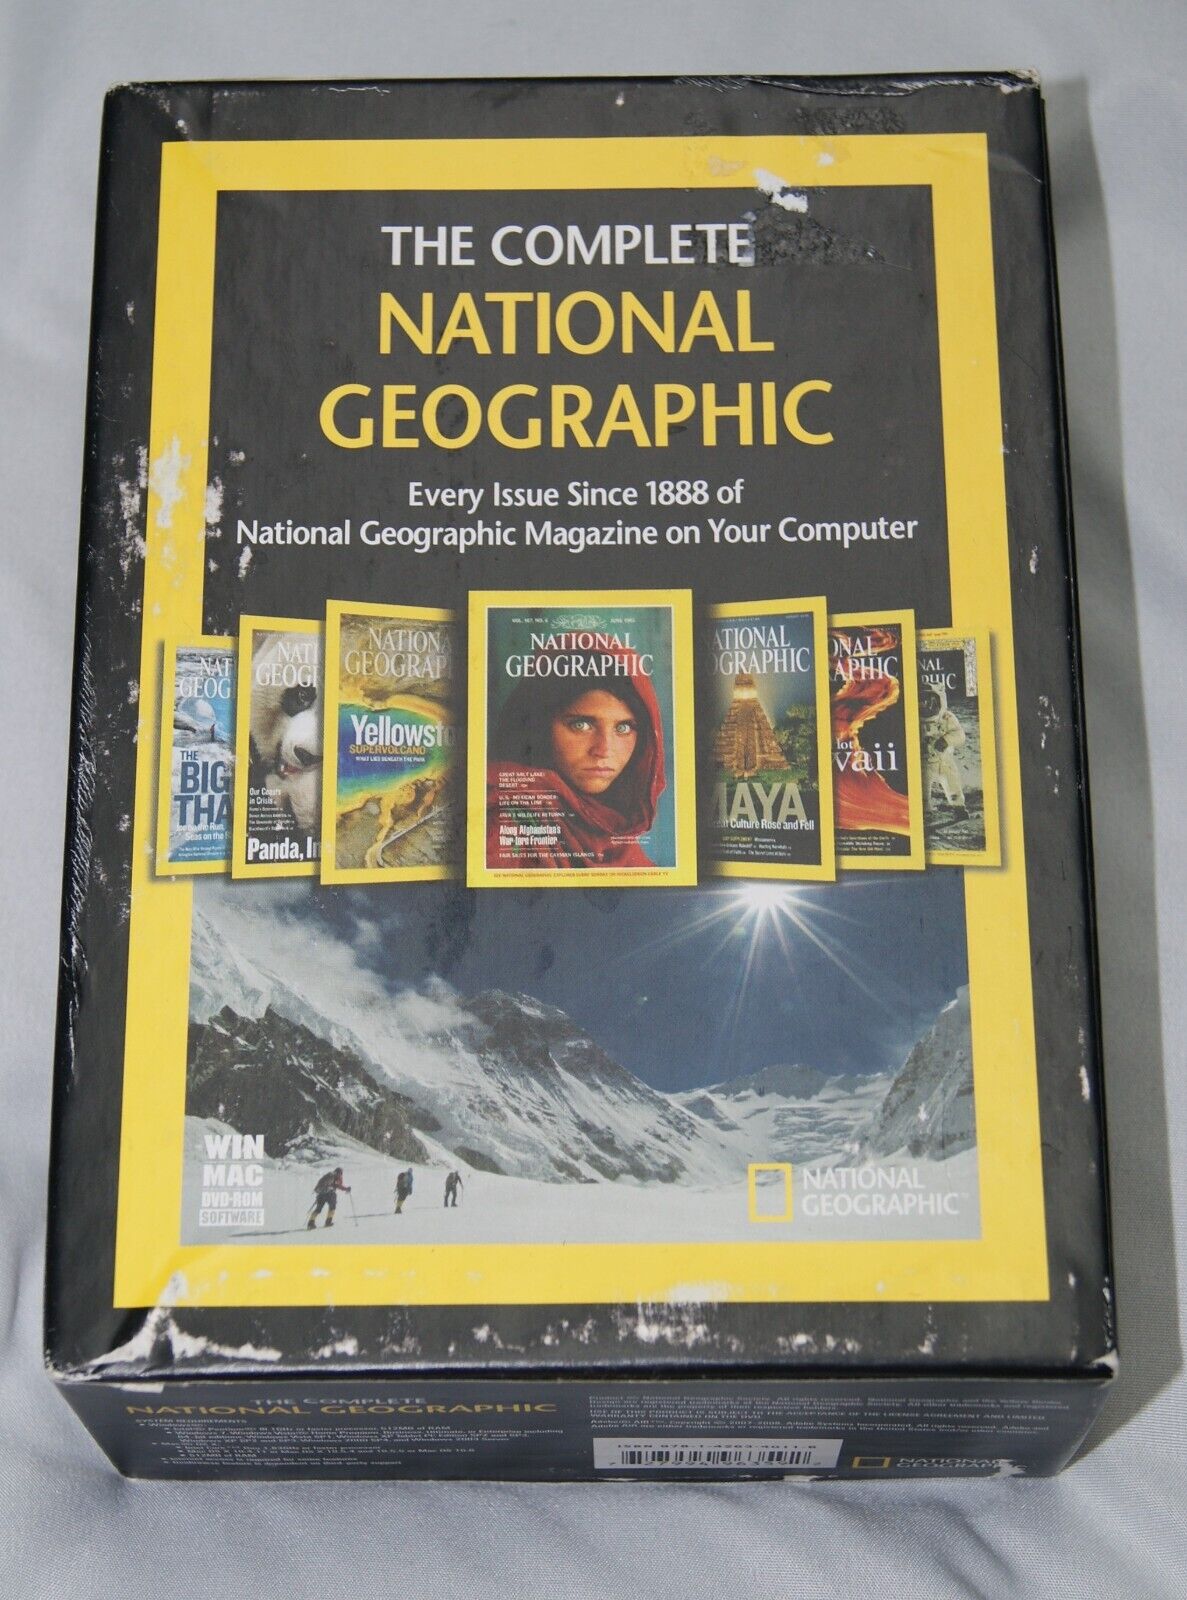 The Complete National Geographic: Every Issue Since 1888 - 2009 PC Mac software